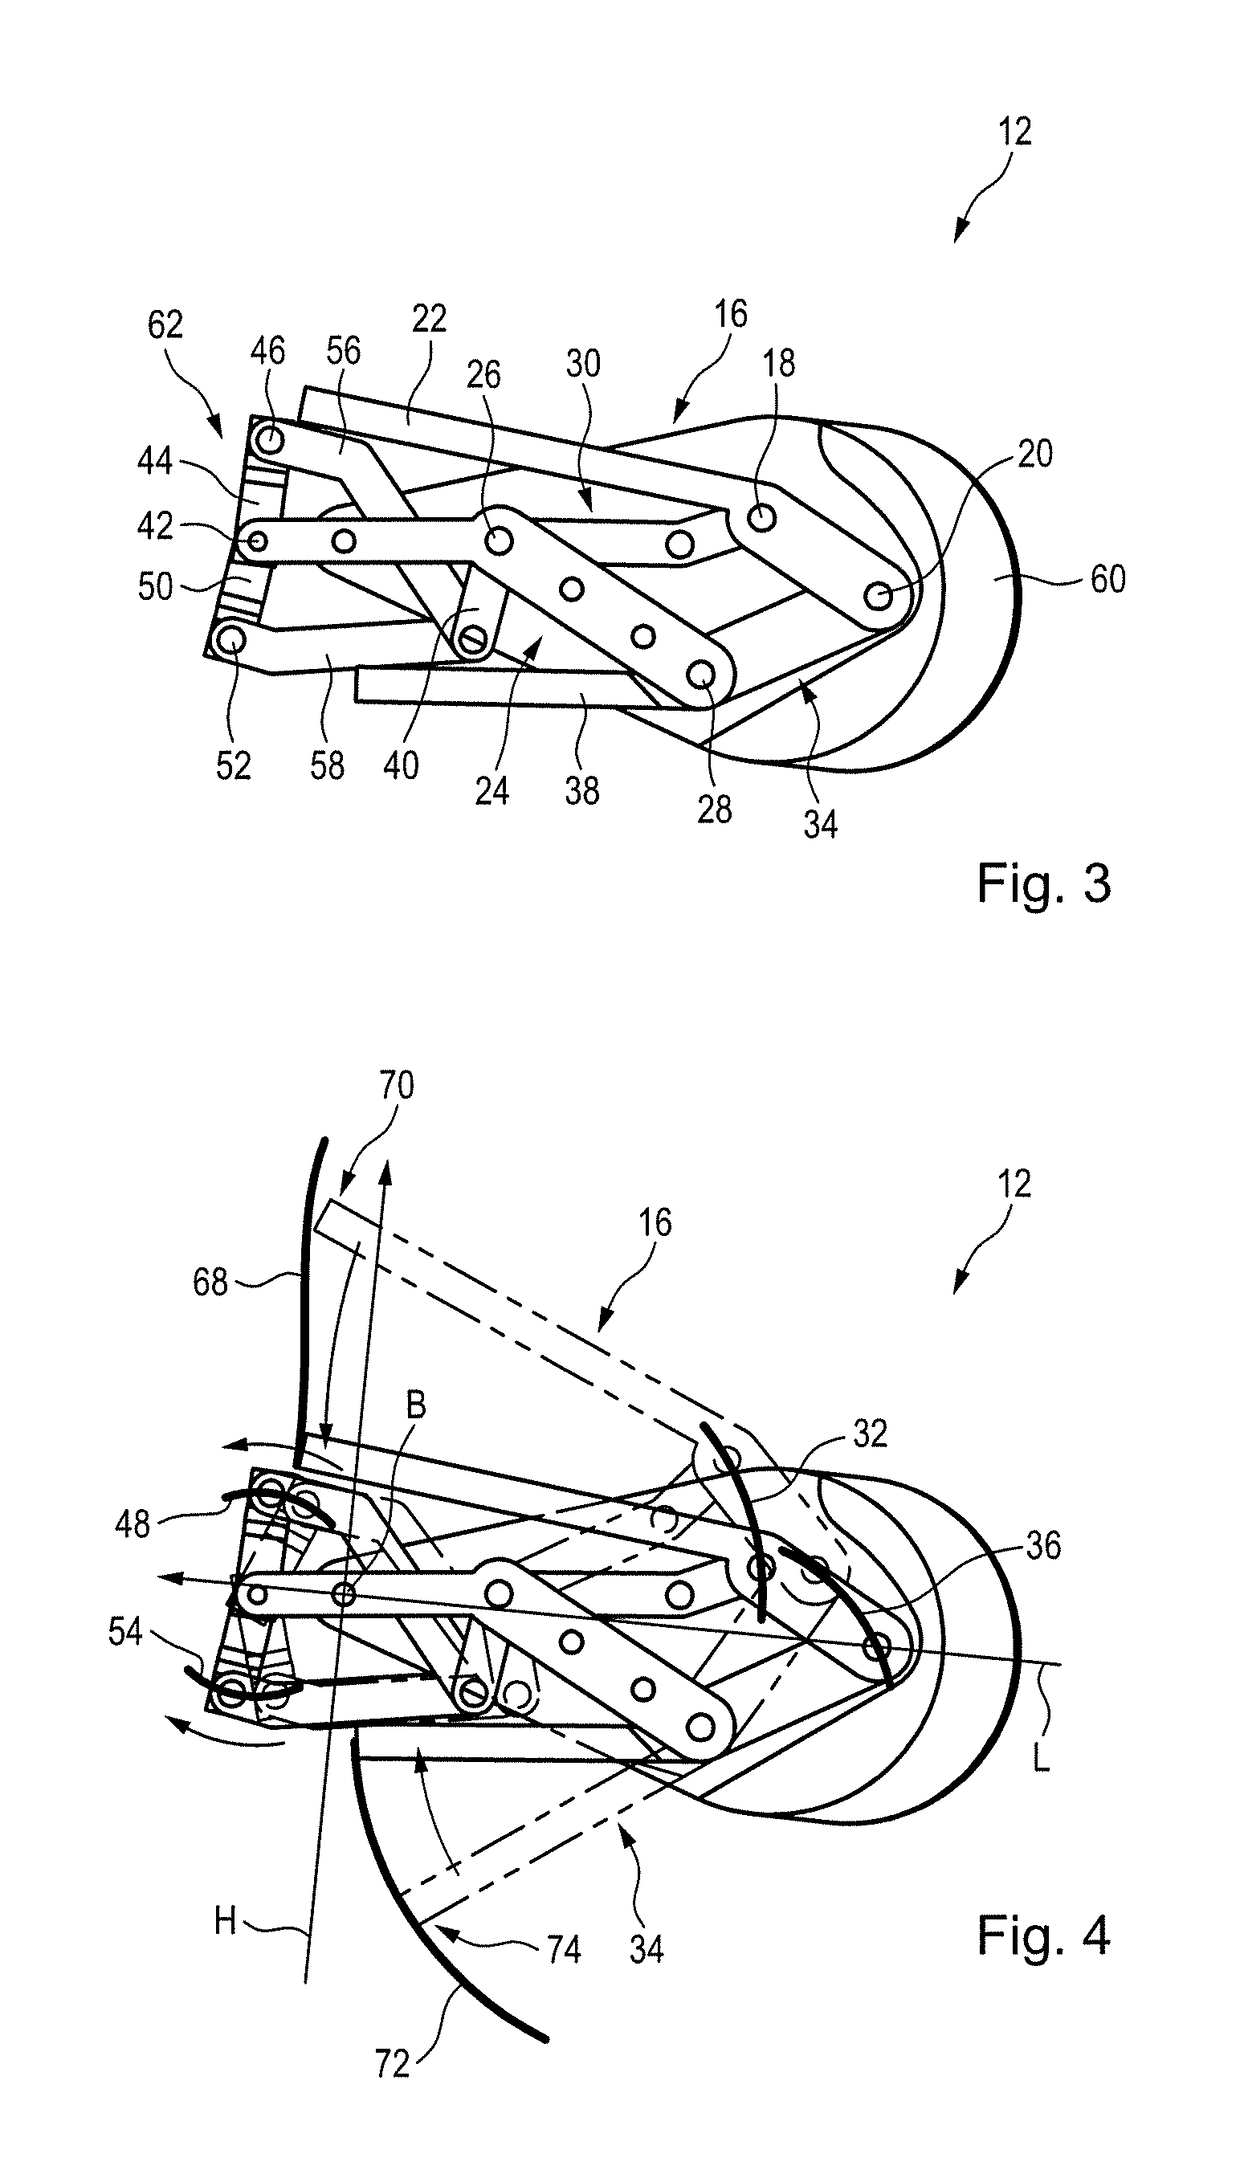 Surgical instrument with a manual control